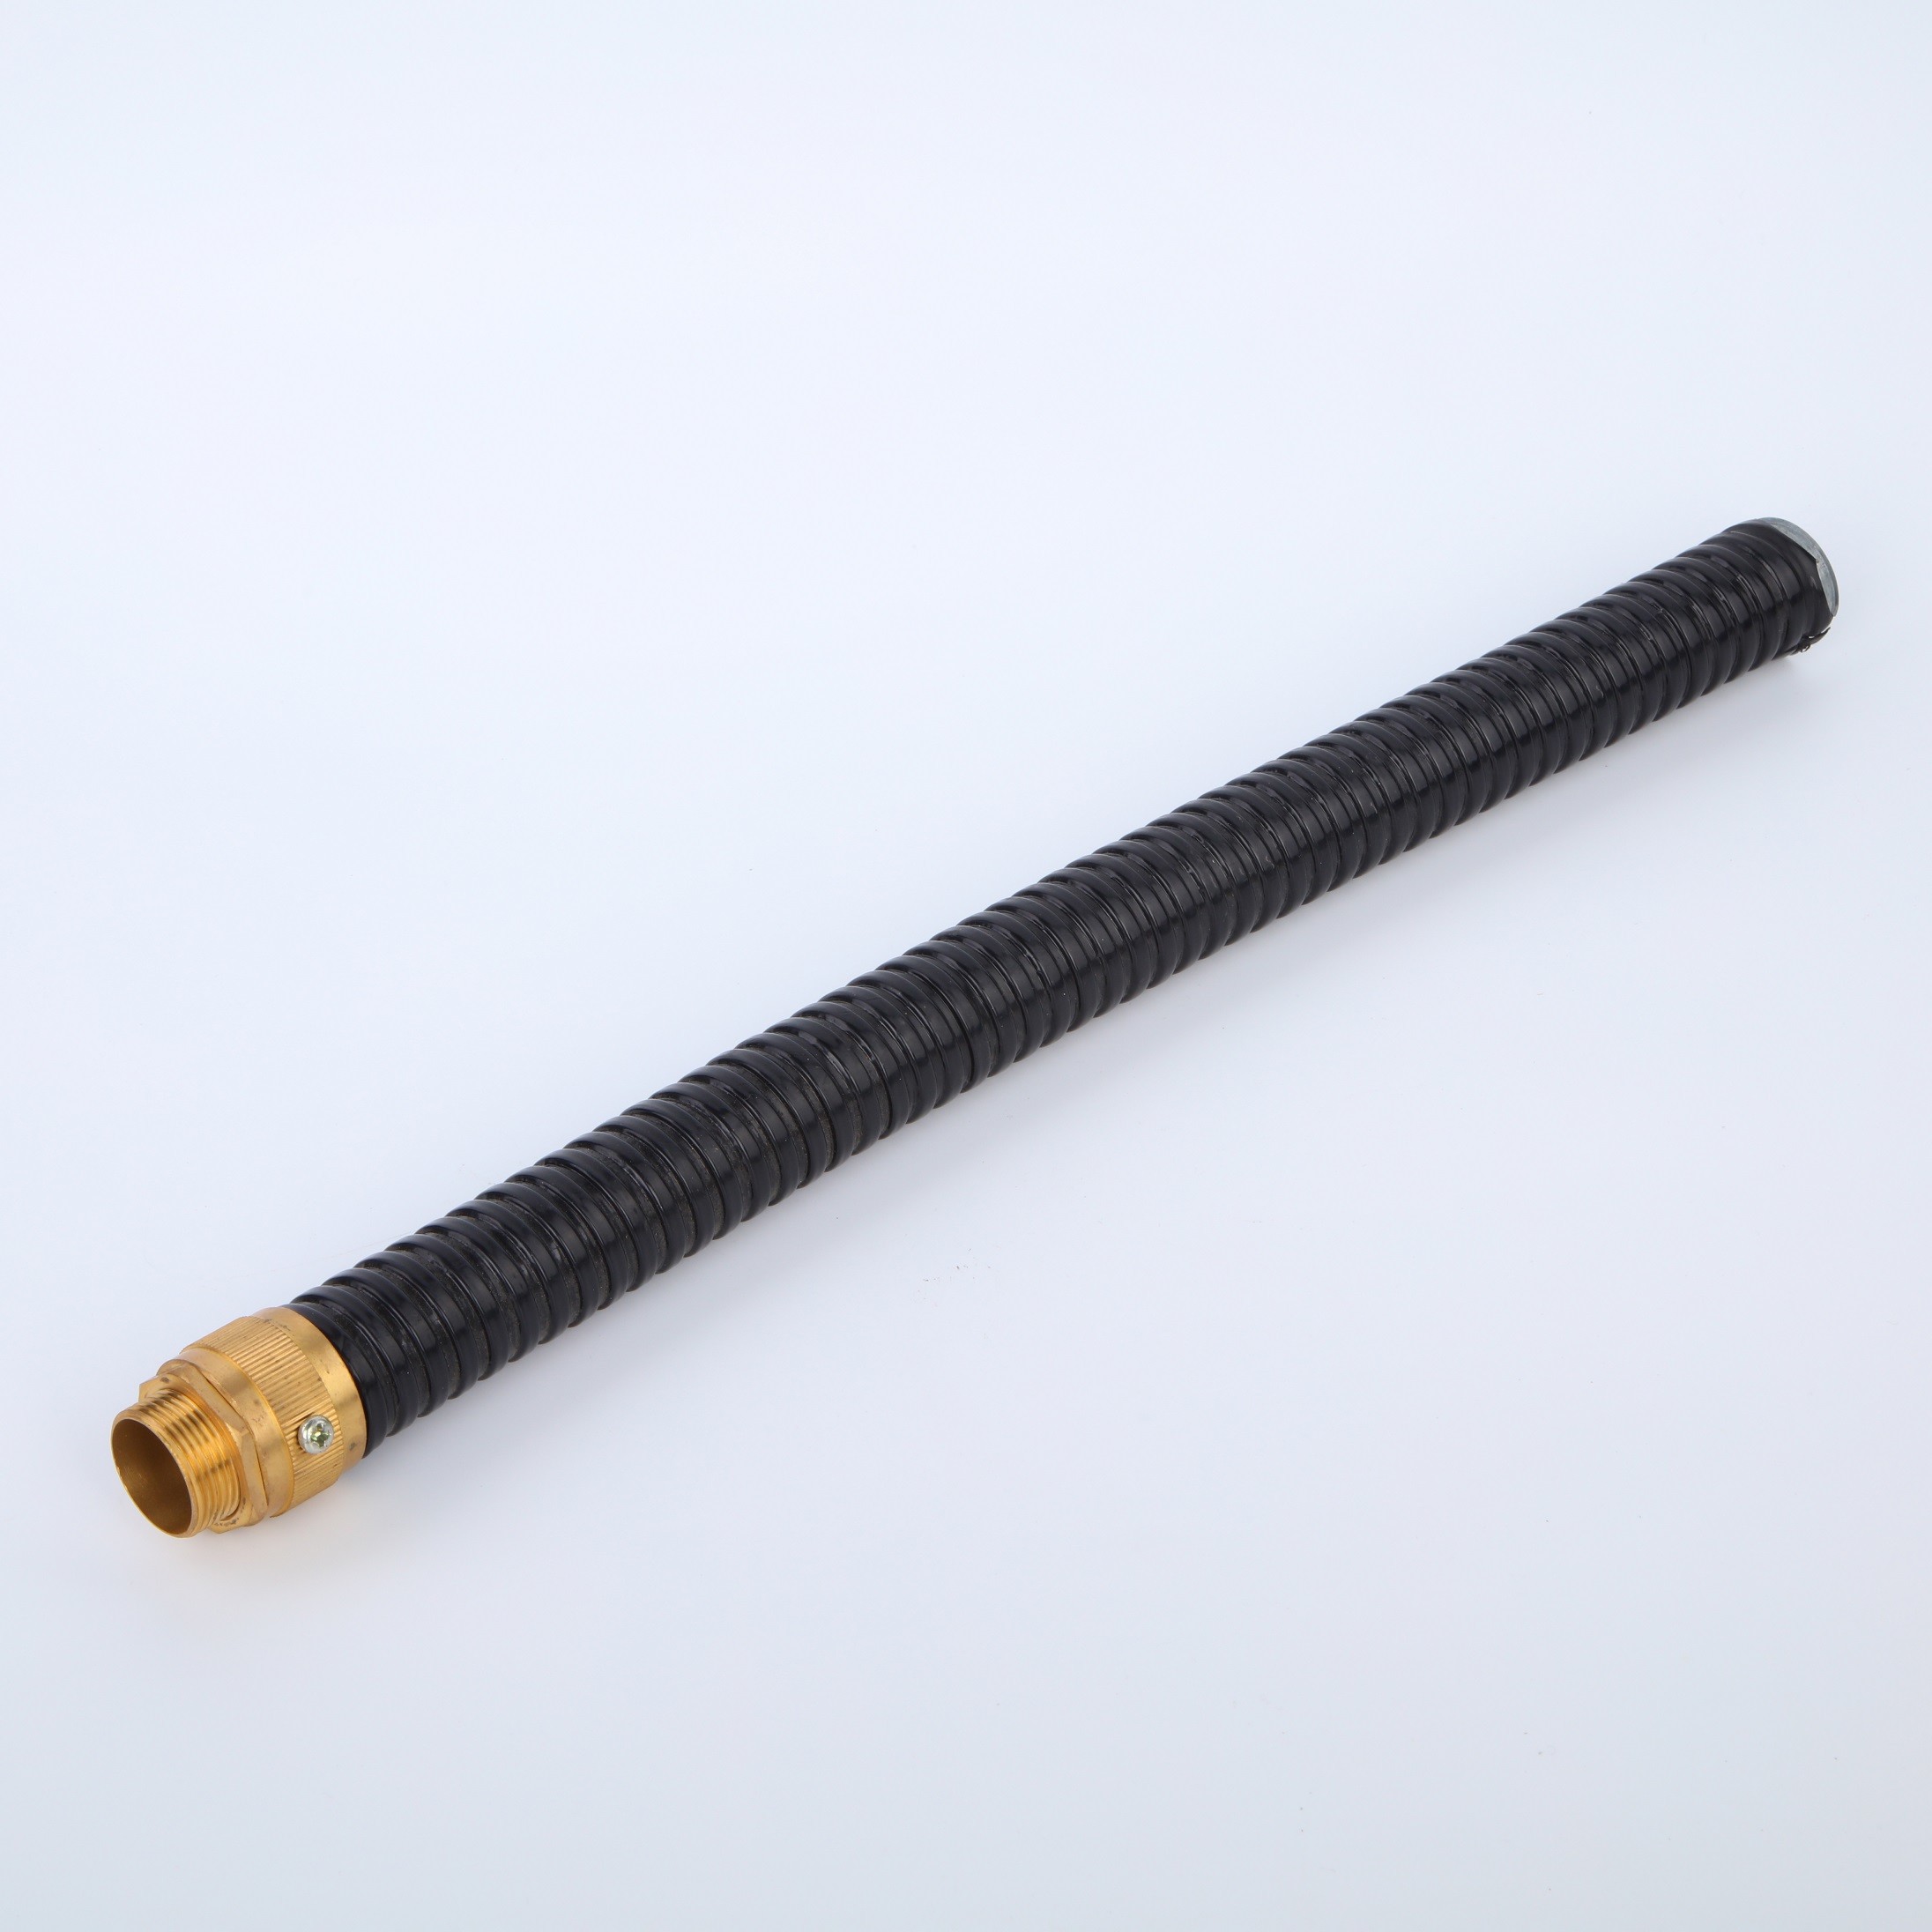 Best PVC Coated GI Flexible Conduit Hose 25mm Thickness 0.22mm Black PVC All New Material IP AND LOW SMOKE TEST report wholesale